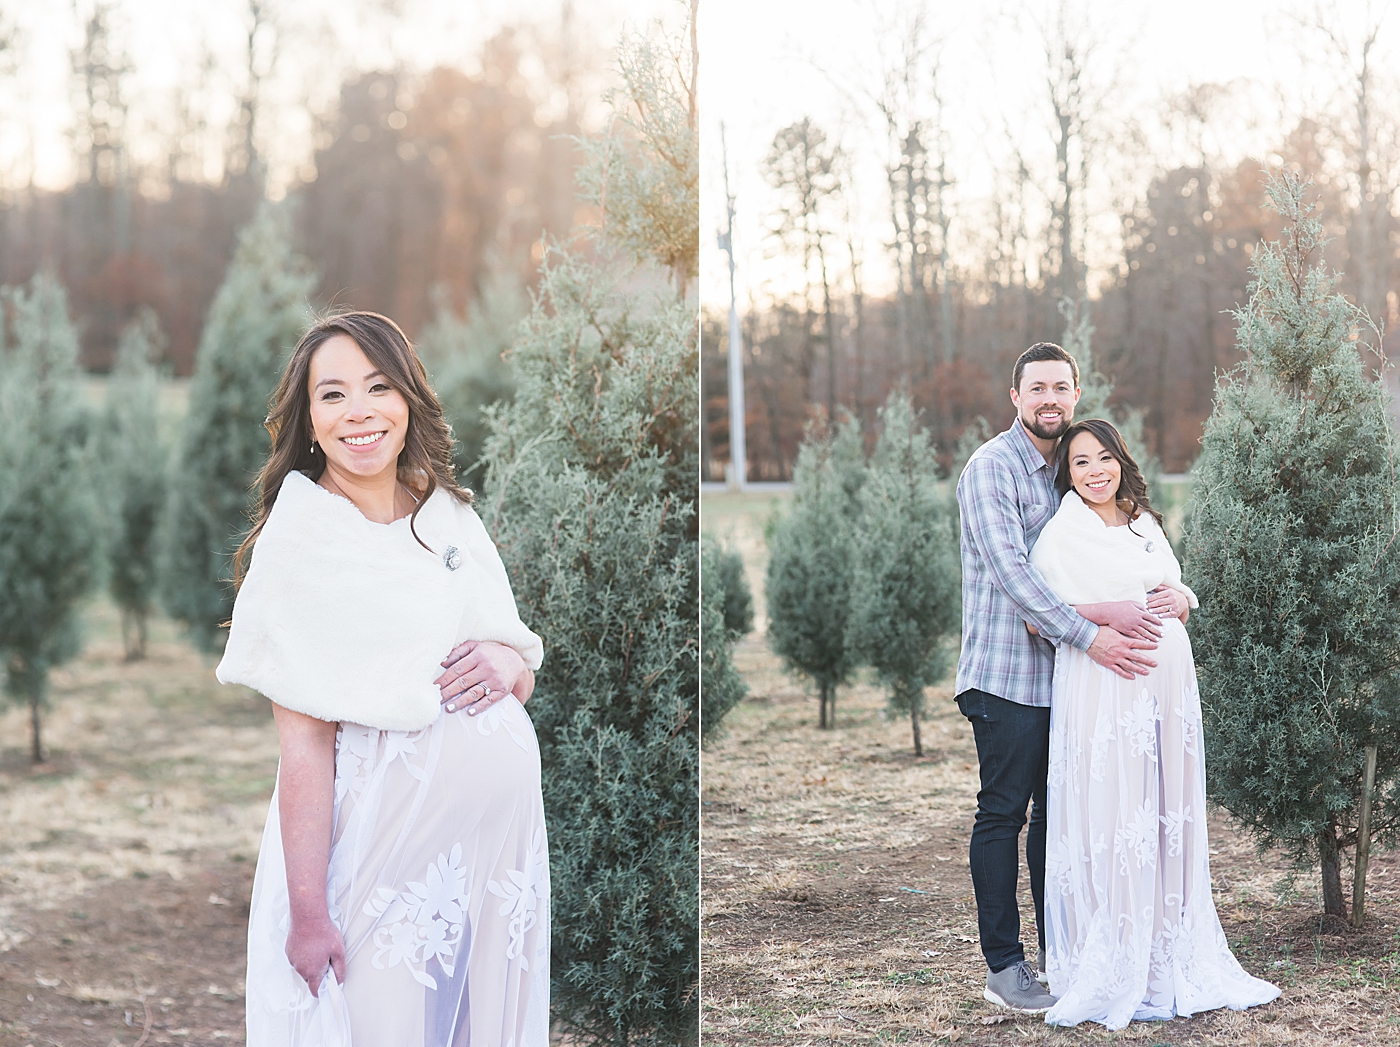 Mom to be in fur shawl holding her belly | Photo by Anna Wisjo Photography